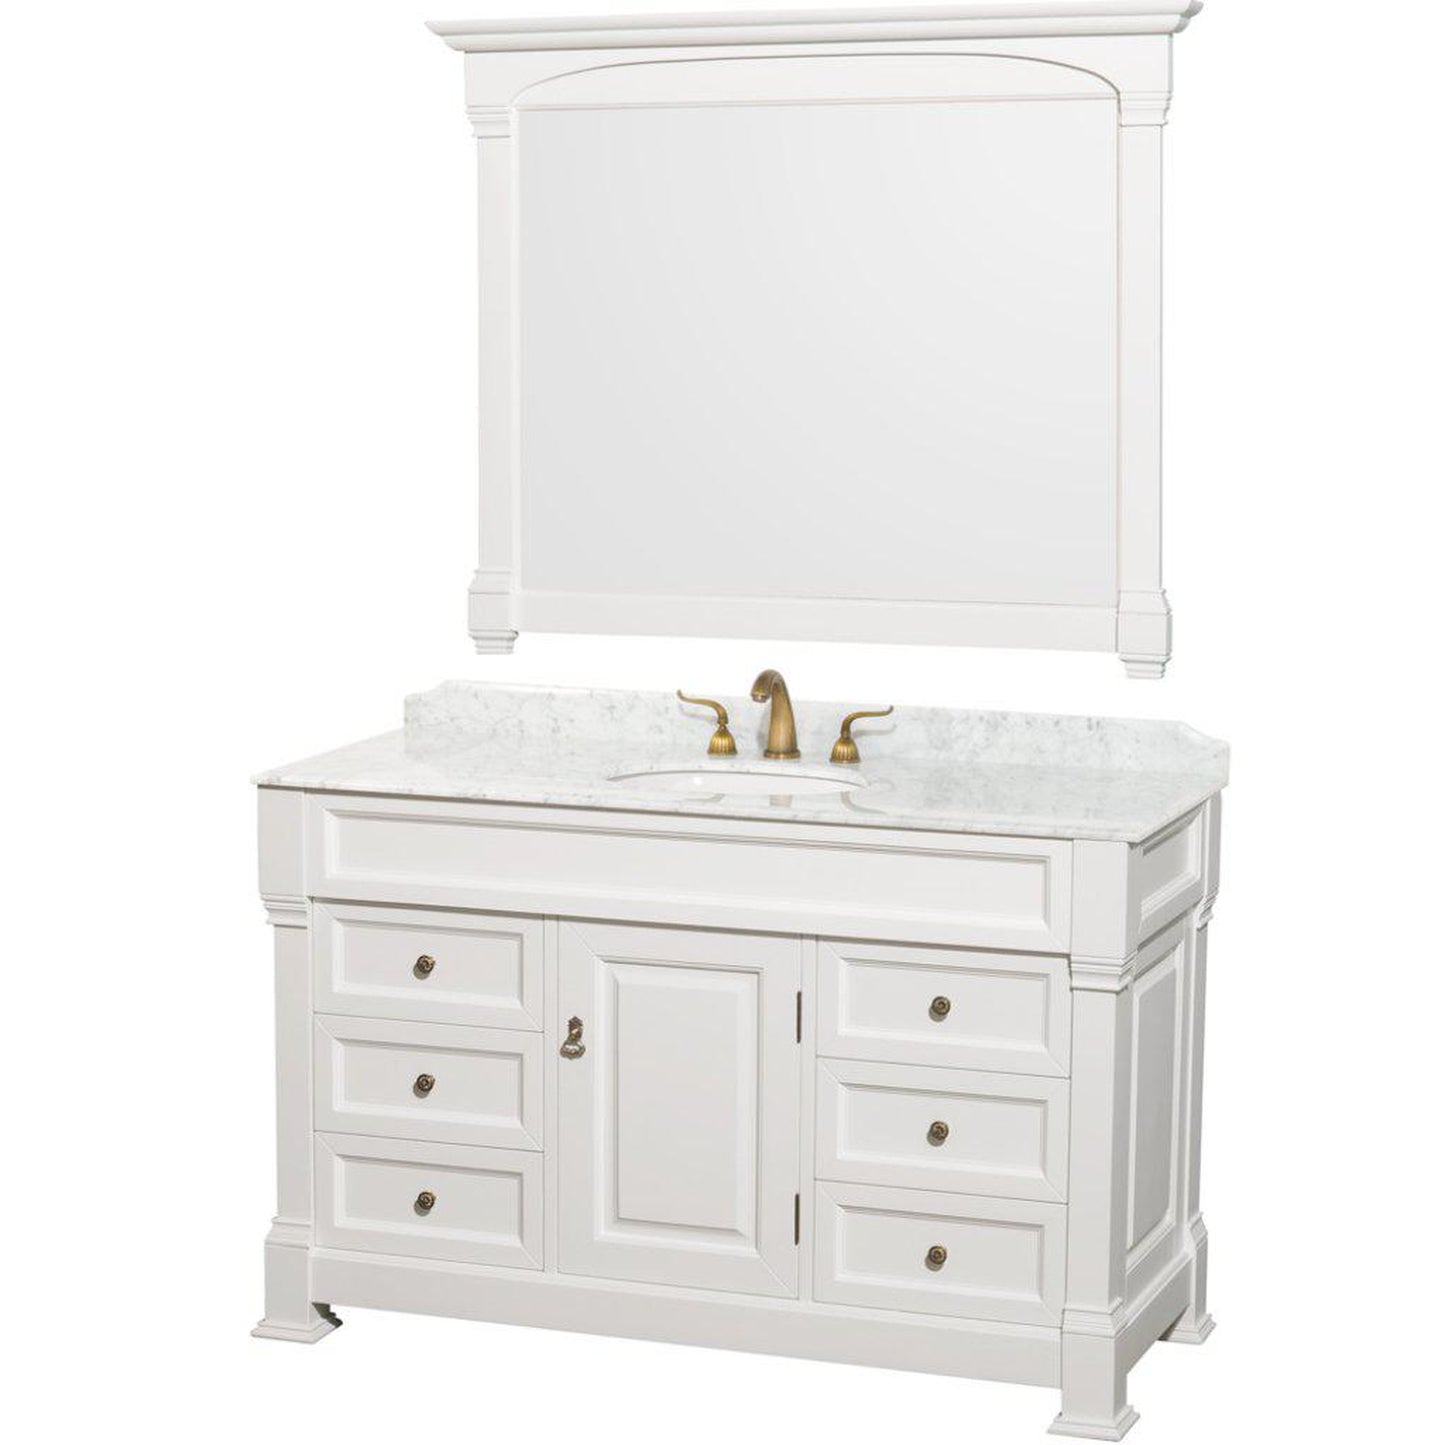 Wyndham Collection Andover 55" Single Bathroom White Vanity Set With White Carrara Marble Countertop And Undermount Oval Sink, And 50" Mirror